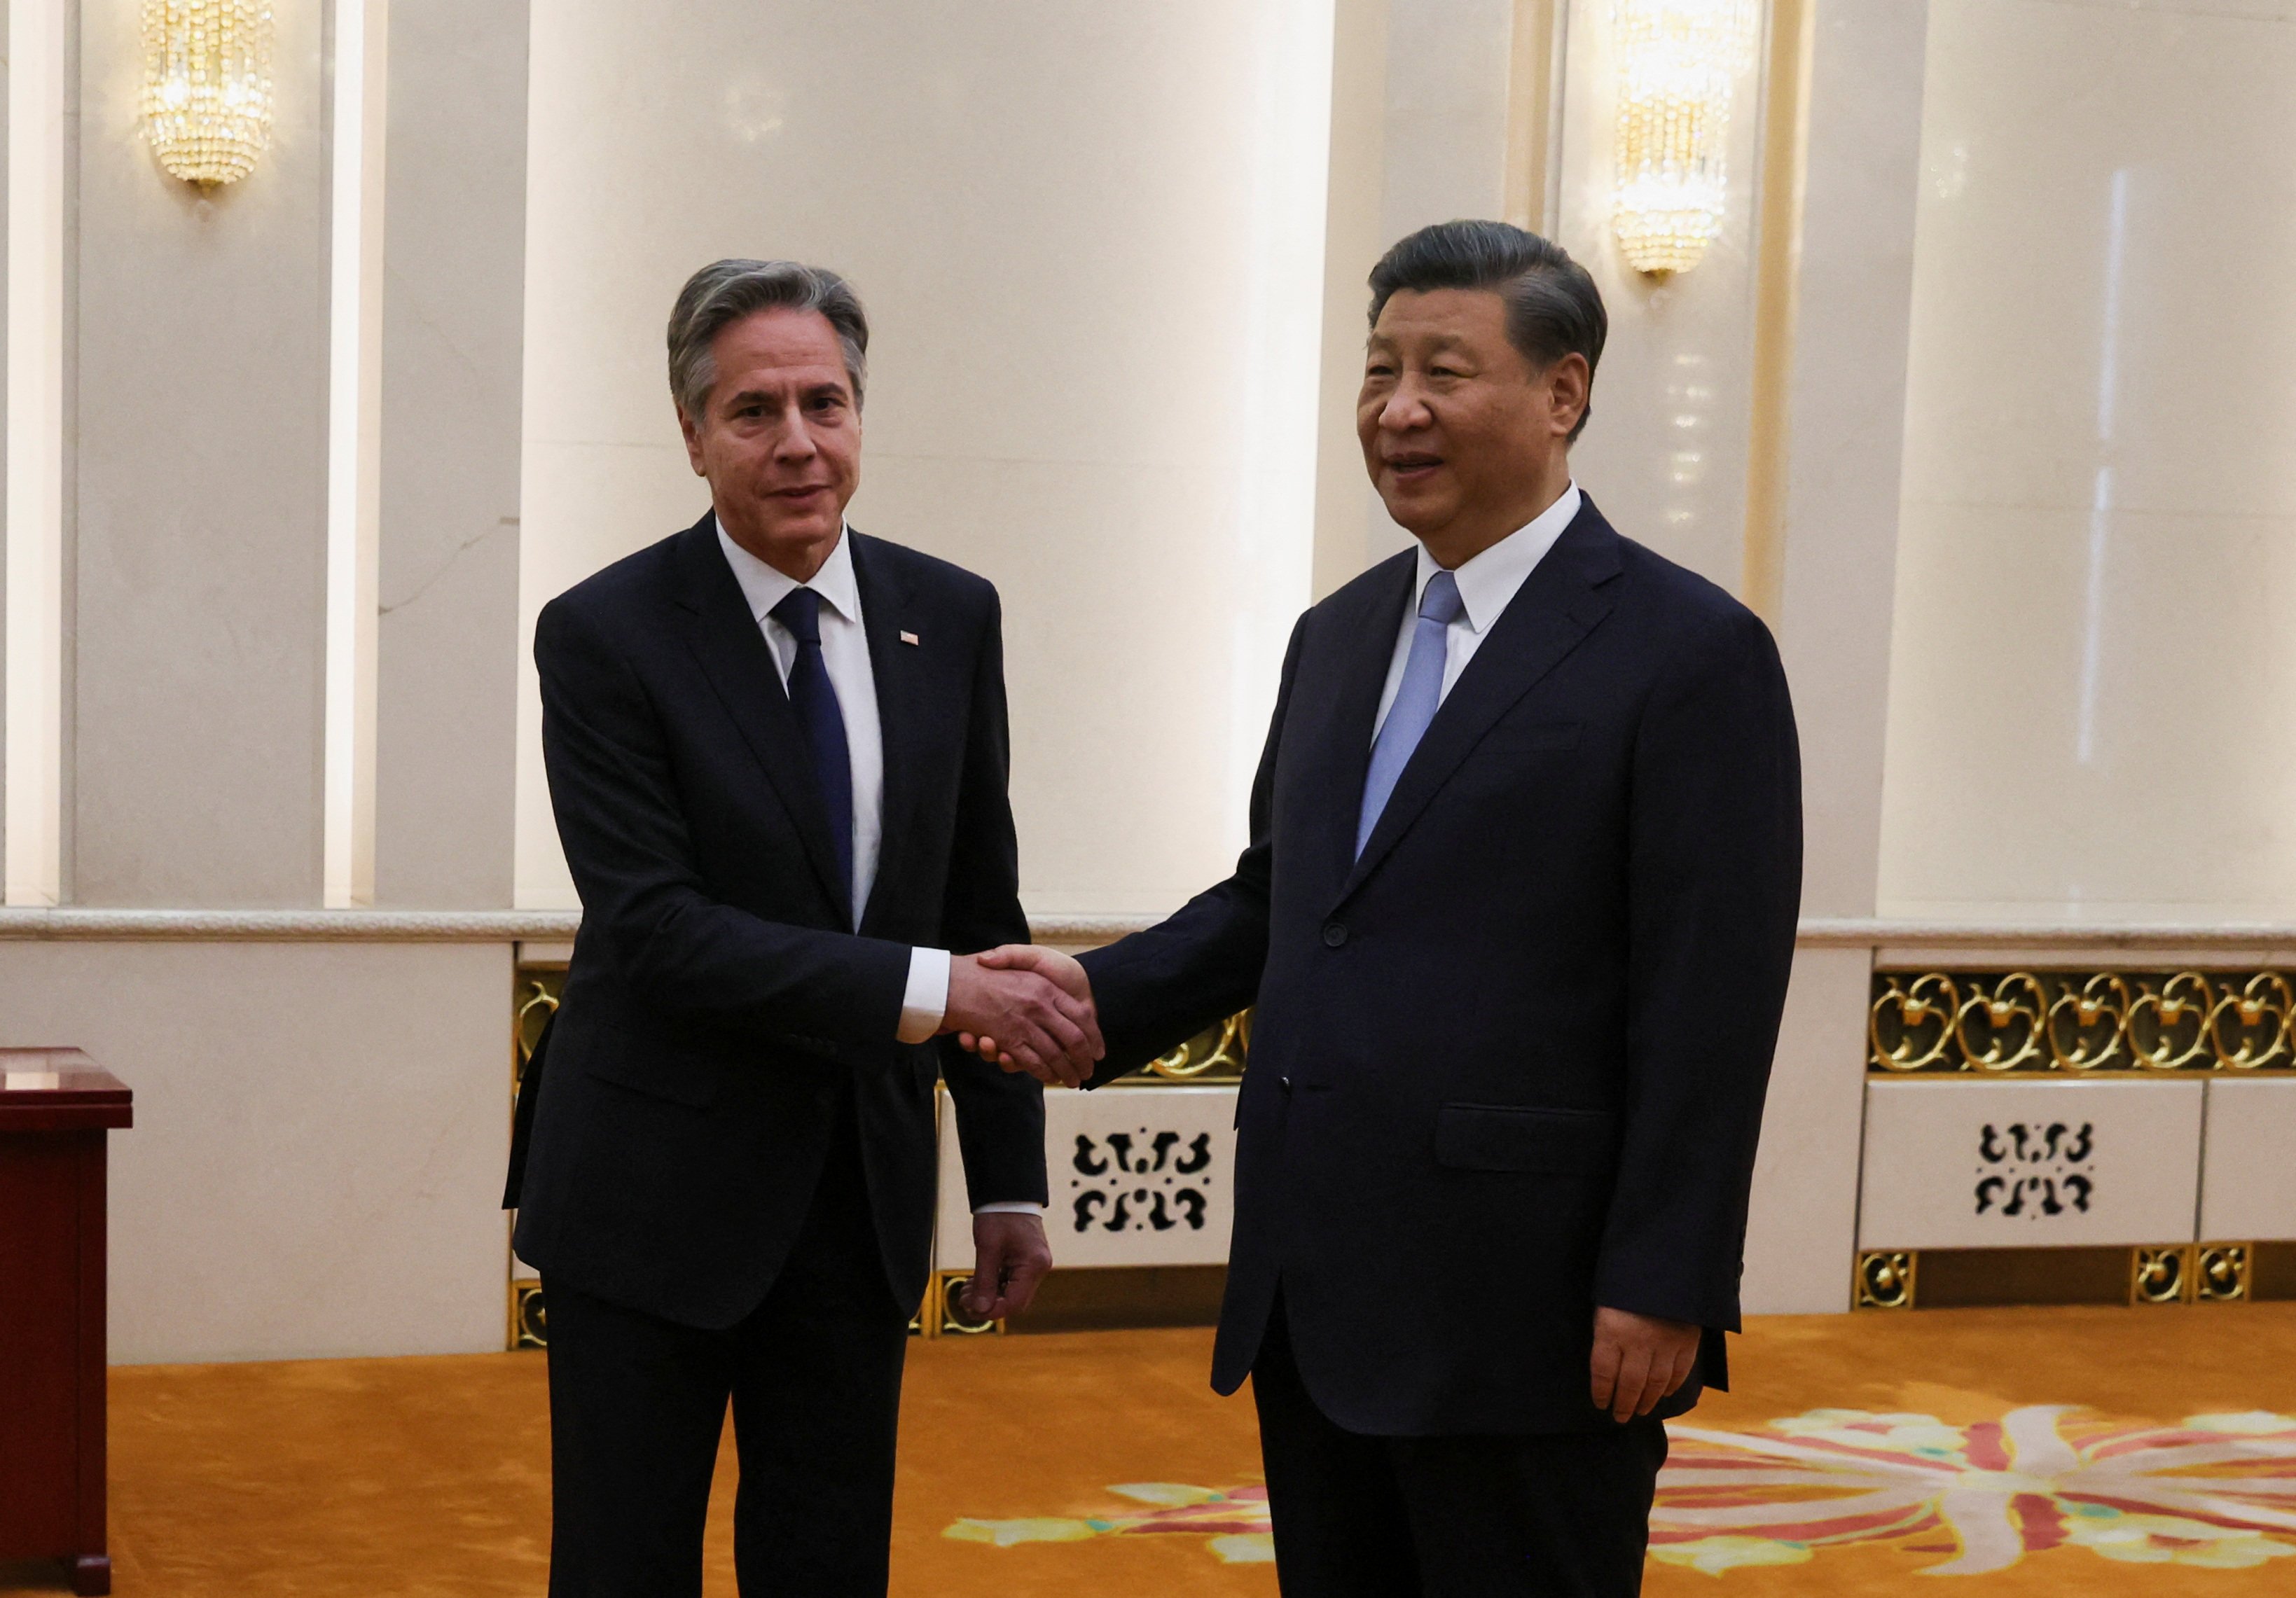 US Secretary of State Antony Blinken shakes hands with Chinese President Xi Jinping at the Great Hall of the People in Beijing on Monday. Photo: Reuters